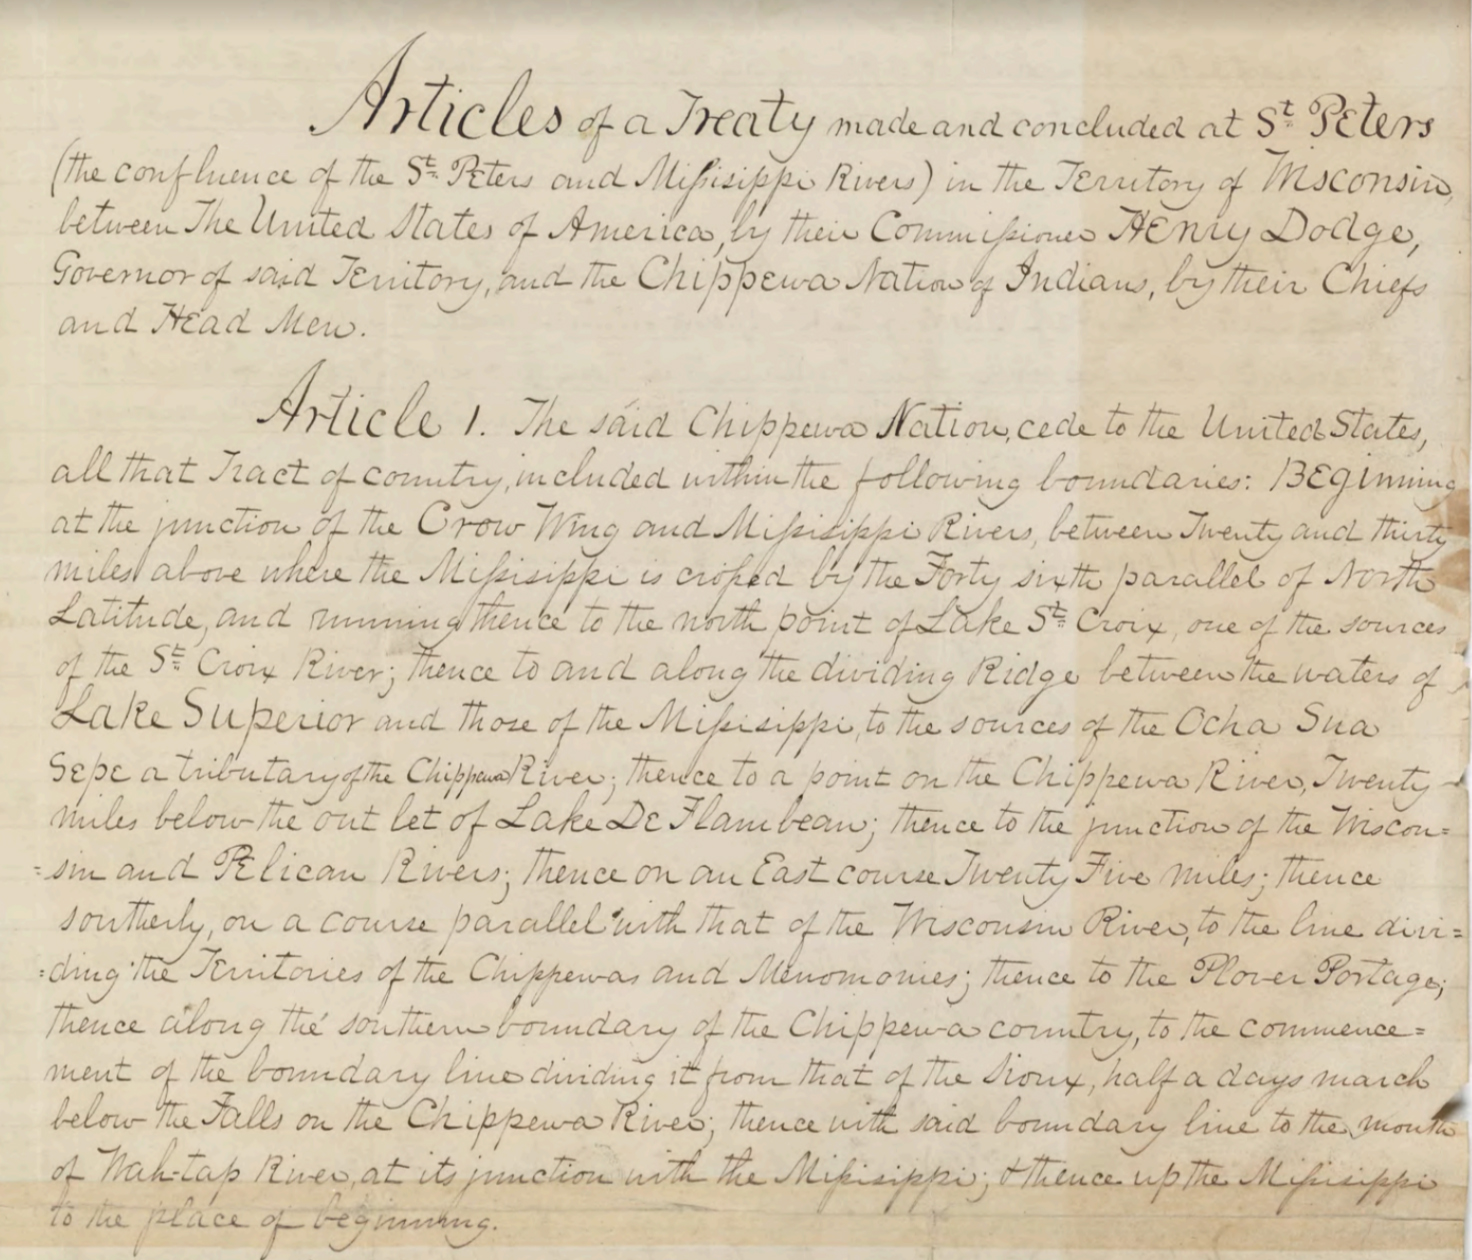 A scan shows the handwritten text of a treaty on a piece of ruled paper.